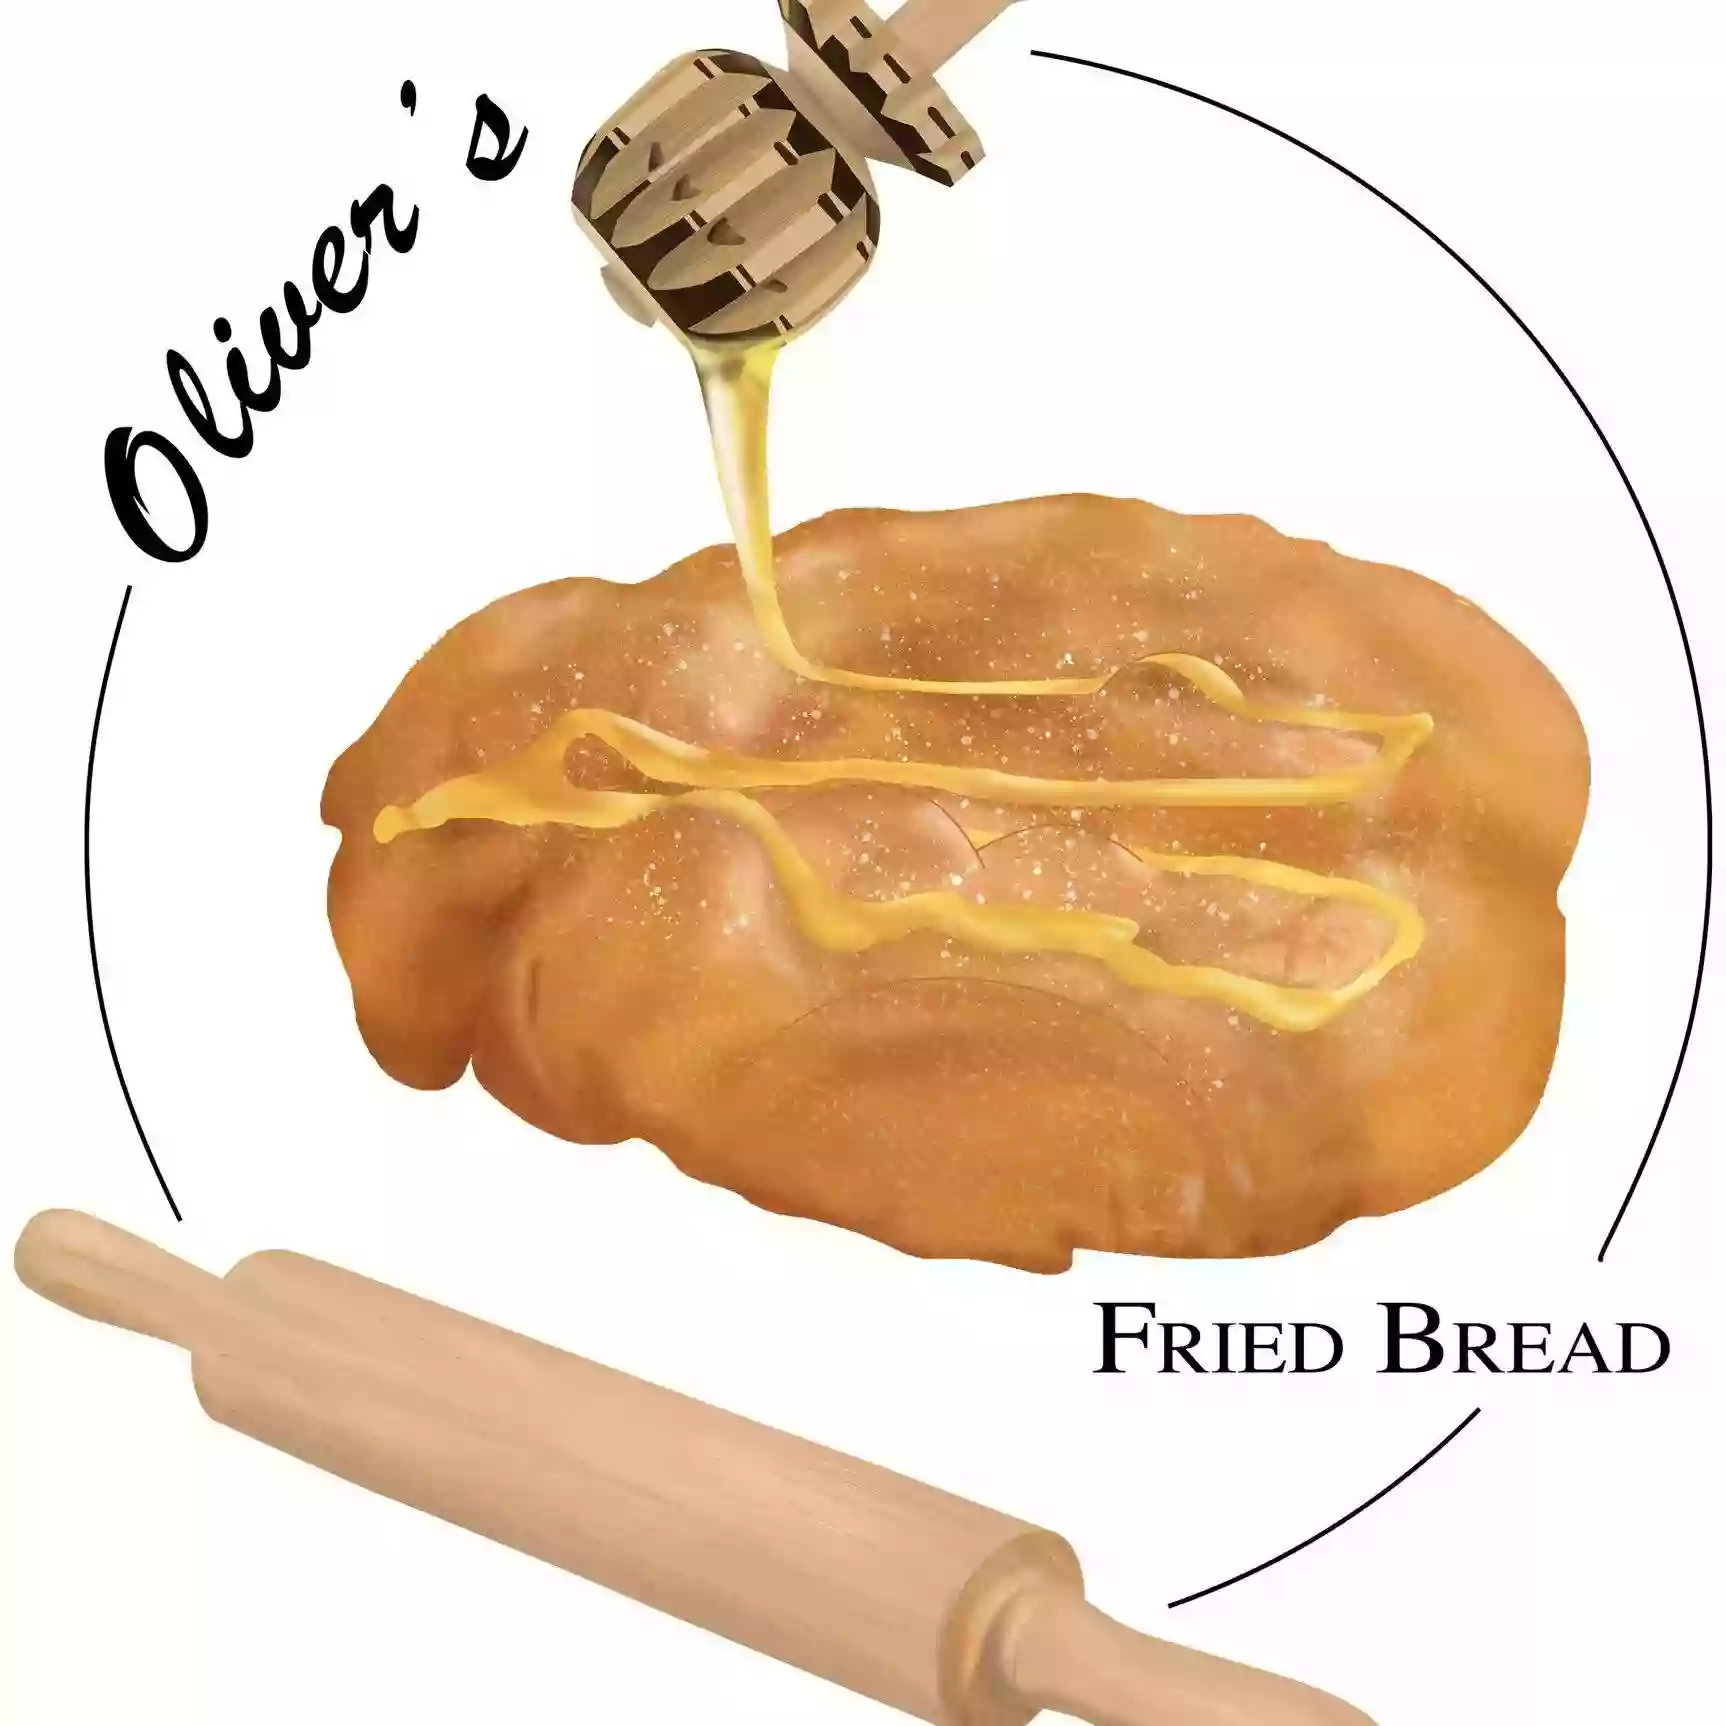 Oliver's Fried Bread